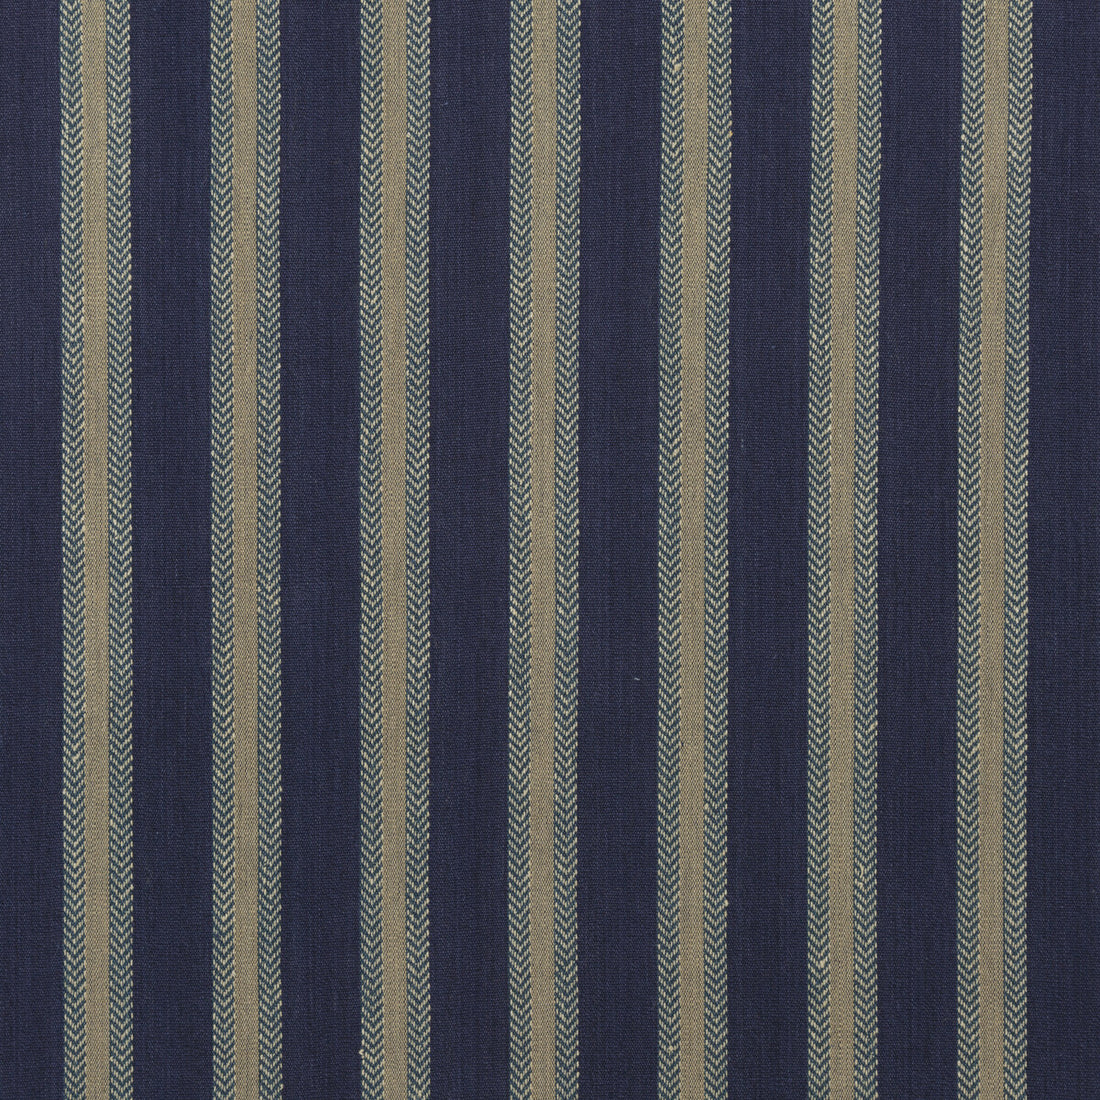 Chester Stripe fabric in indigo color - pattern FD760.H10.0 - by Mulberry in the Festival collection